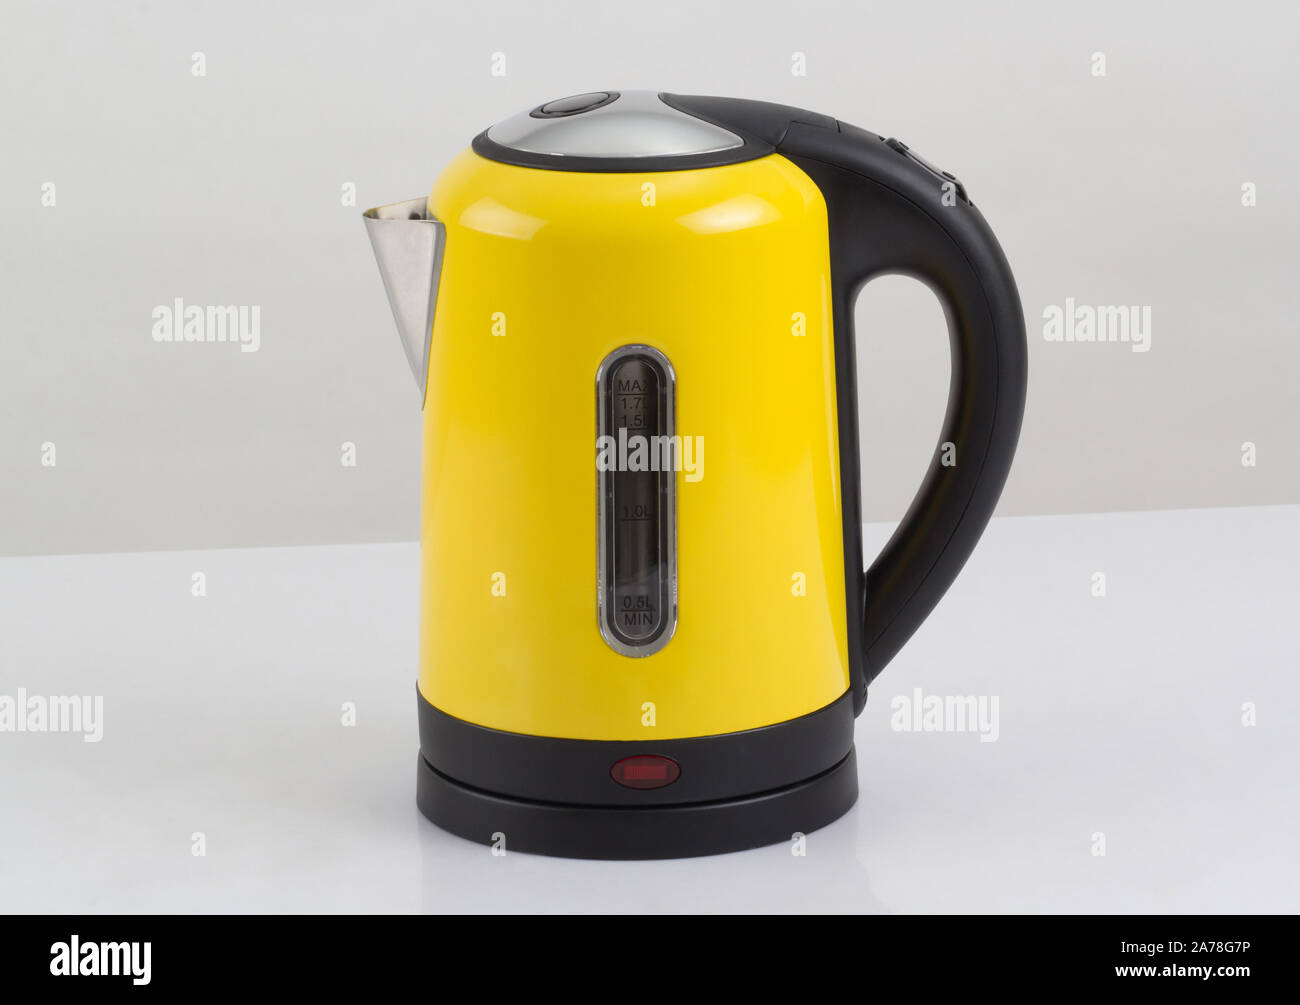 https://c8.alamy.com/comp/2A78G7P/modern-yellow-electric-kettle-isolated-on-white-background-2A78G7P.jpg